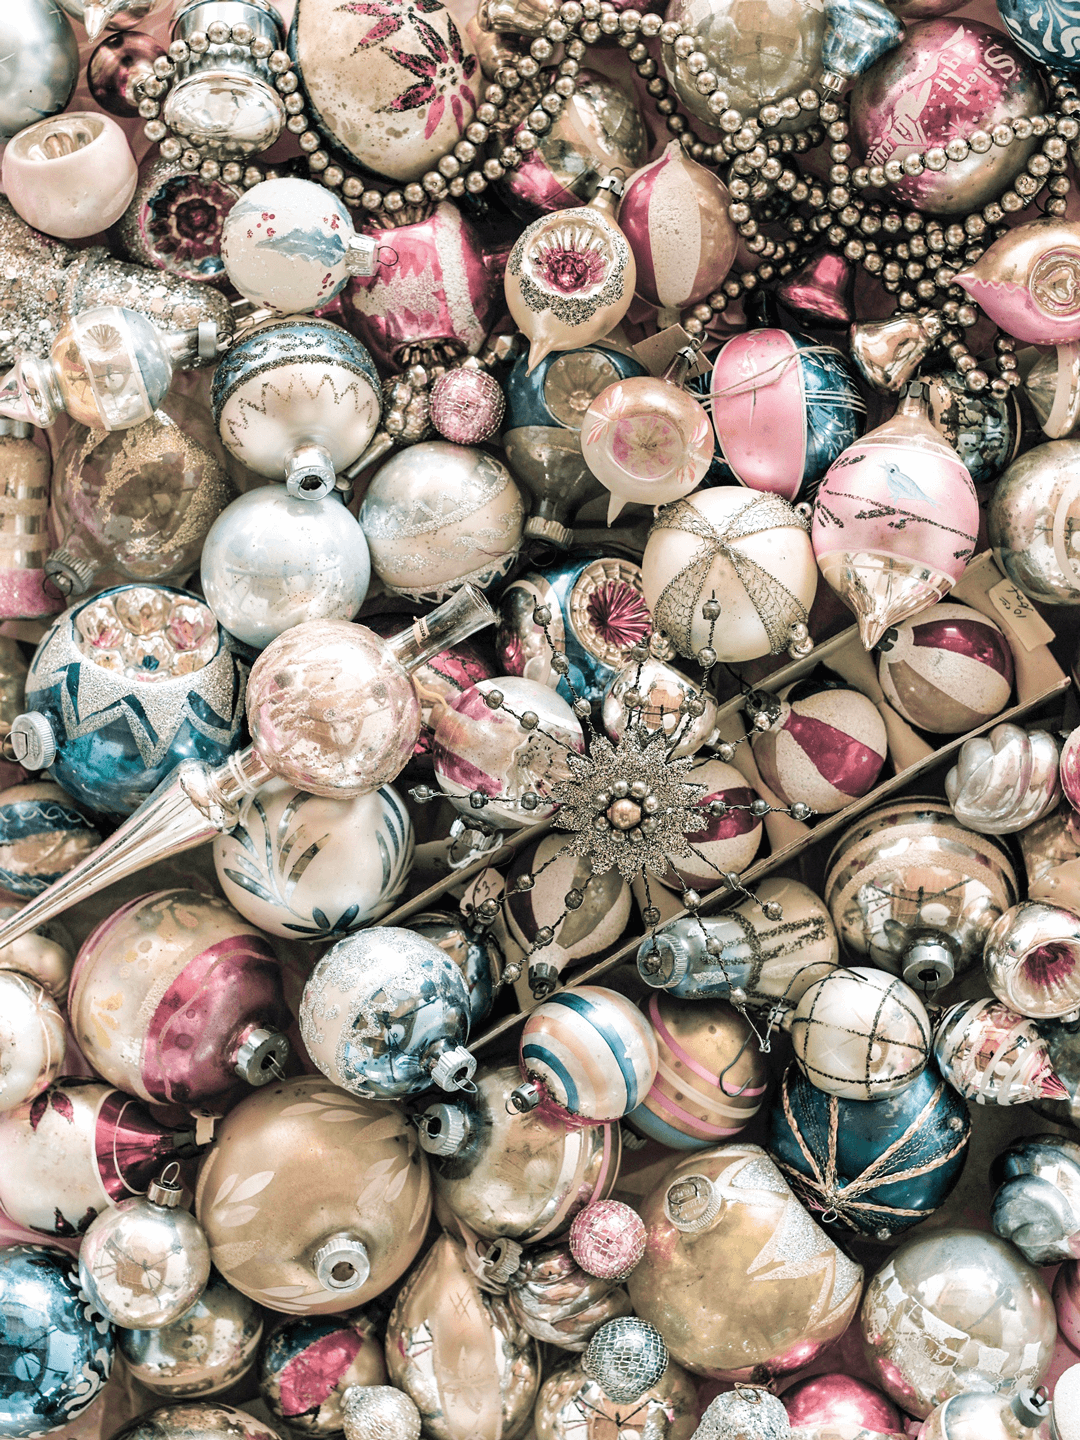 Antique glass Christmas ornaments in pink and blue are prefect for a Shabby Chic Christmas